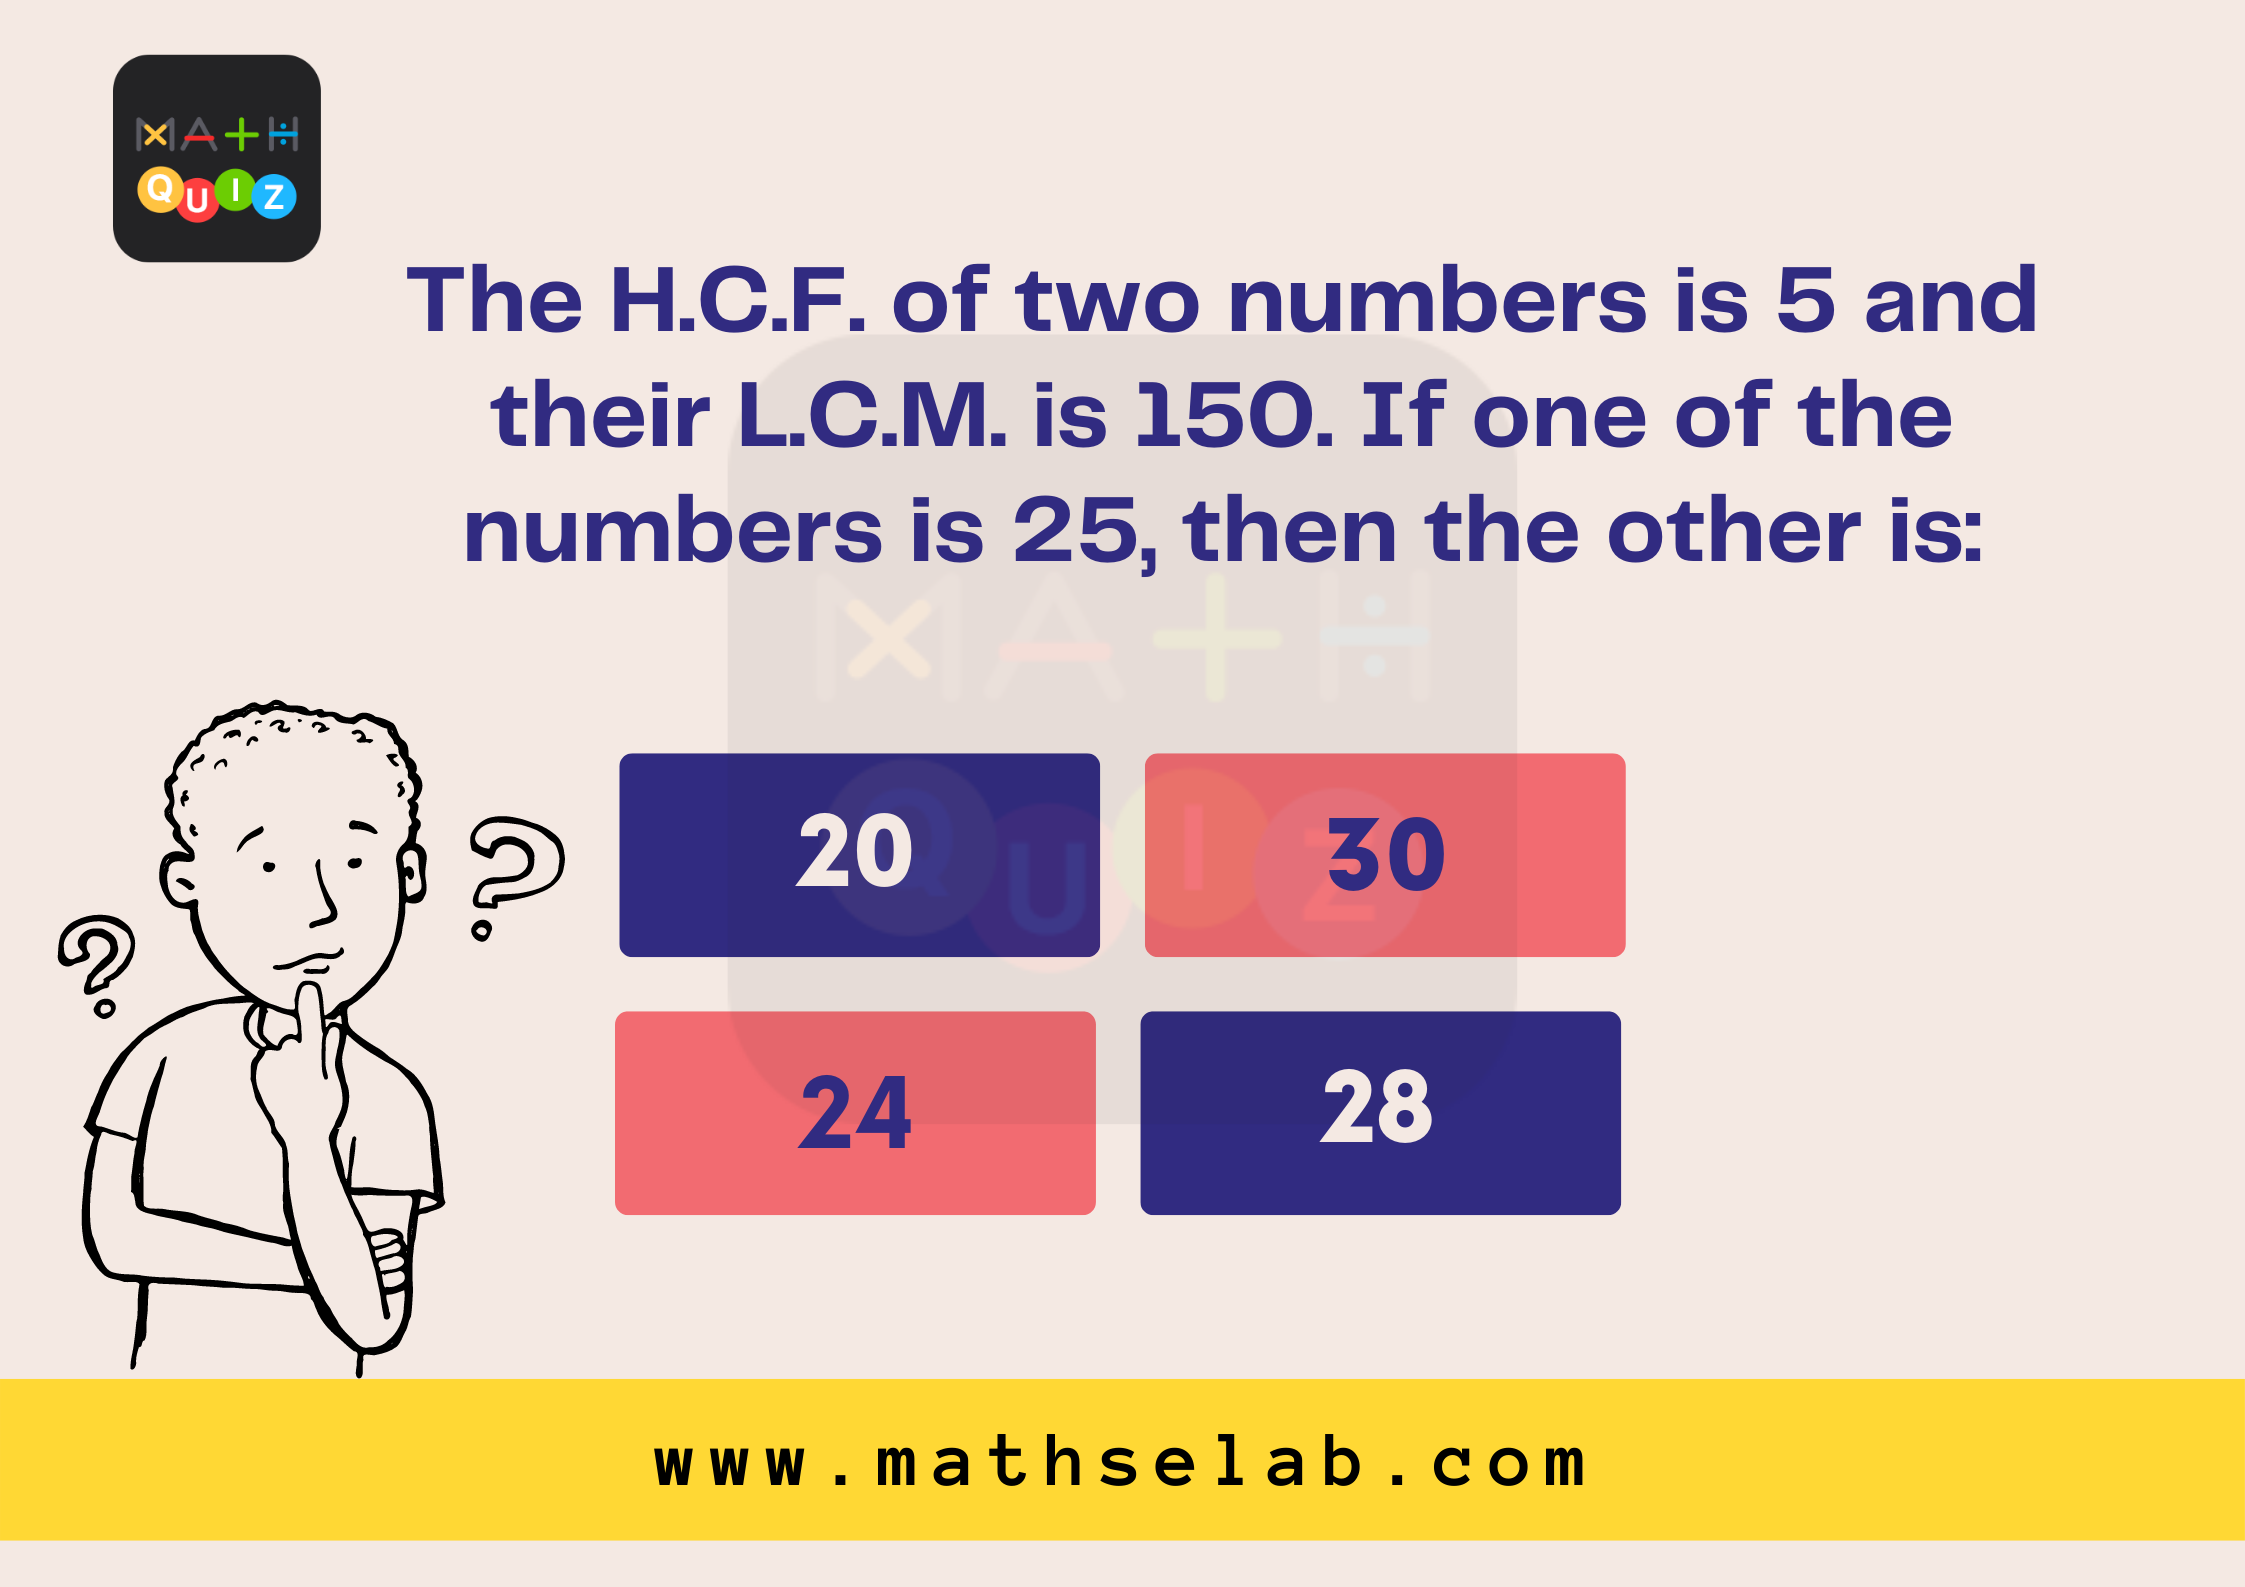 The H.C.F. of two numbers is 5 and their L.C.M. is 150. If one of the numbers is 25, then the other is - mathselab.com